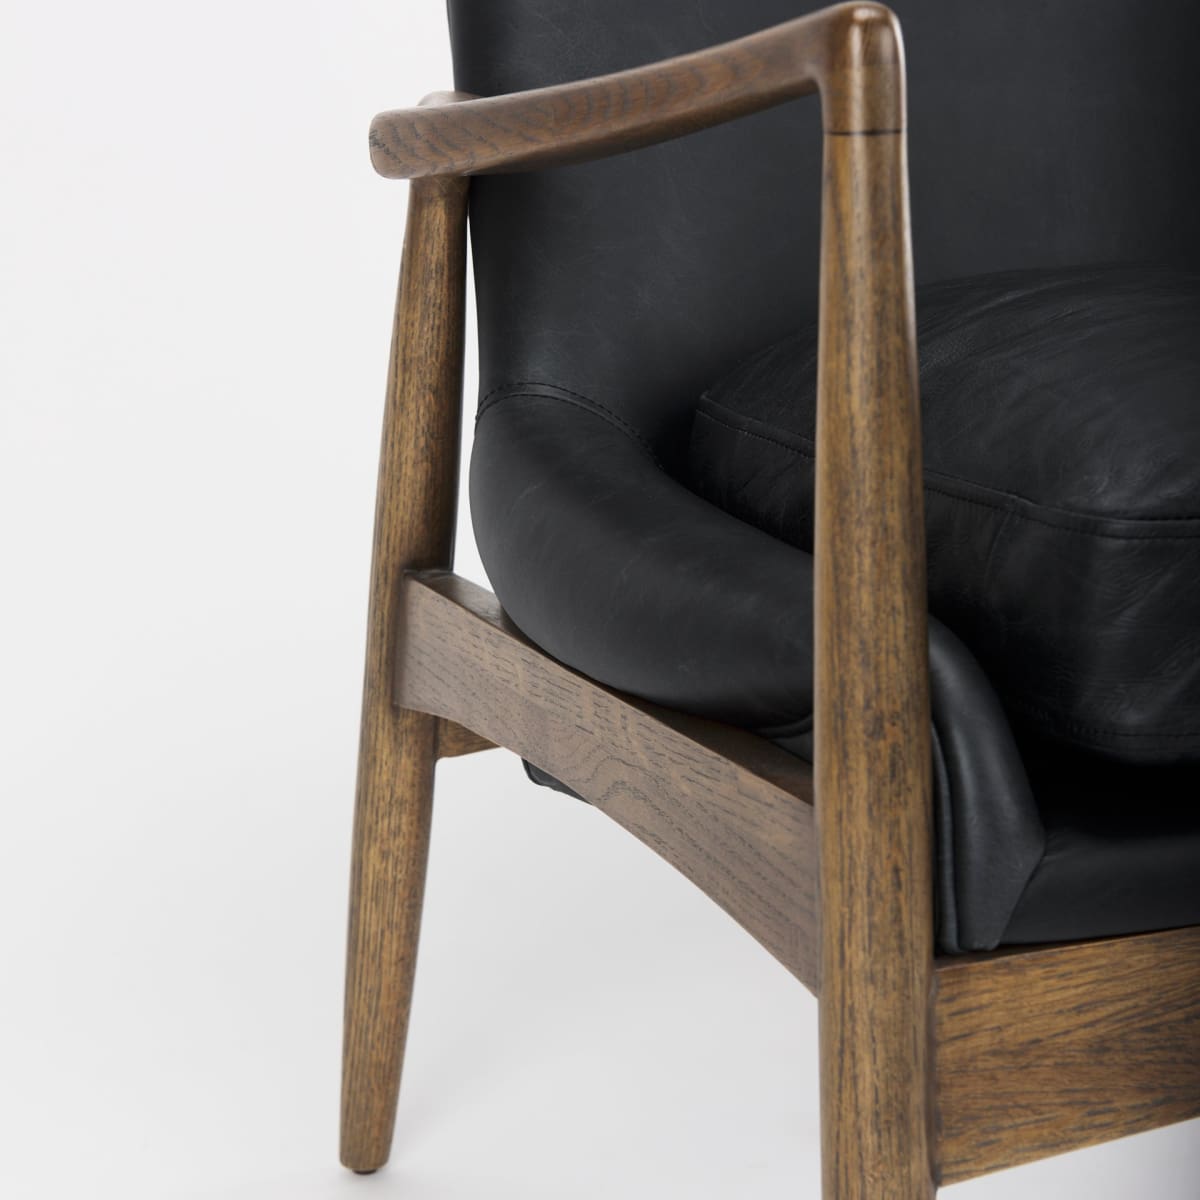 Westan Accent Chair Black Leather | Brown Wood - accent-chairs